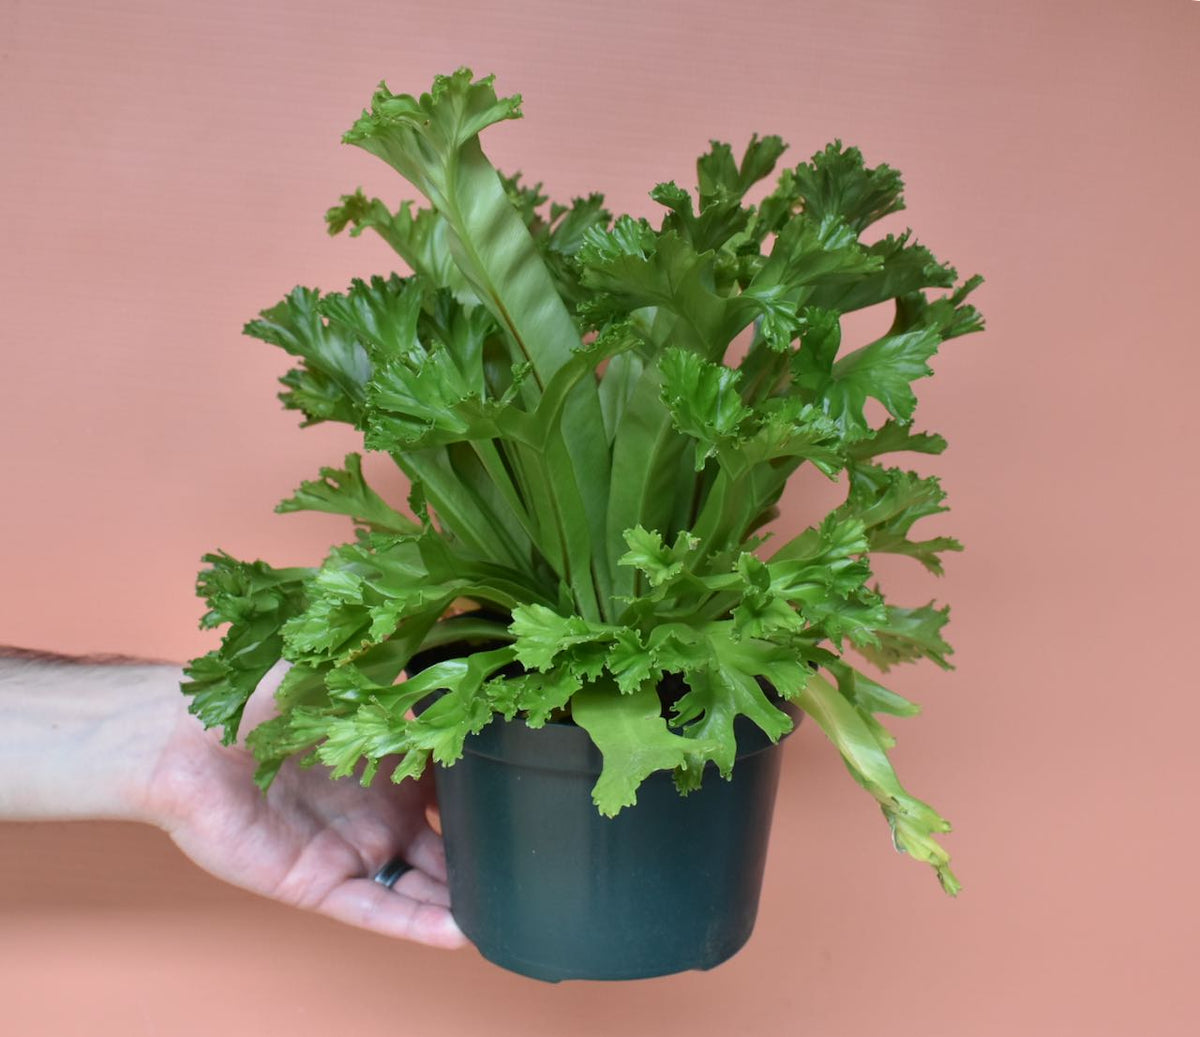 Hand holding air purifying 'Leslie' Bird's Nest Fern in 6-inch plastic grow pot in front of peach color background